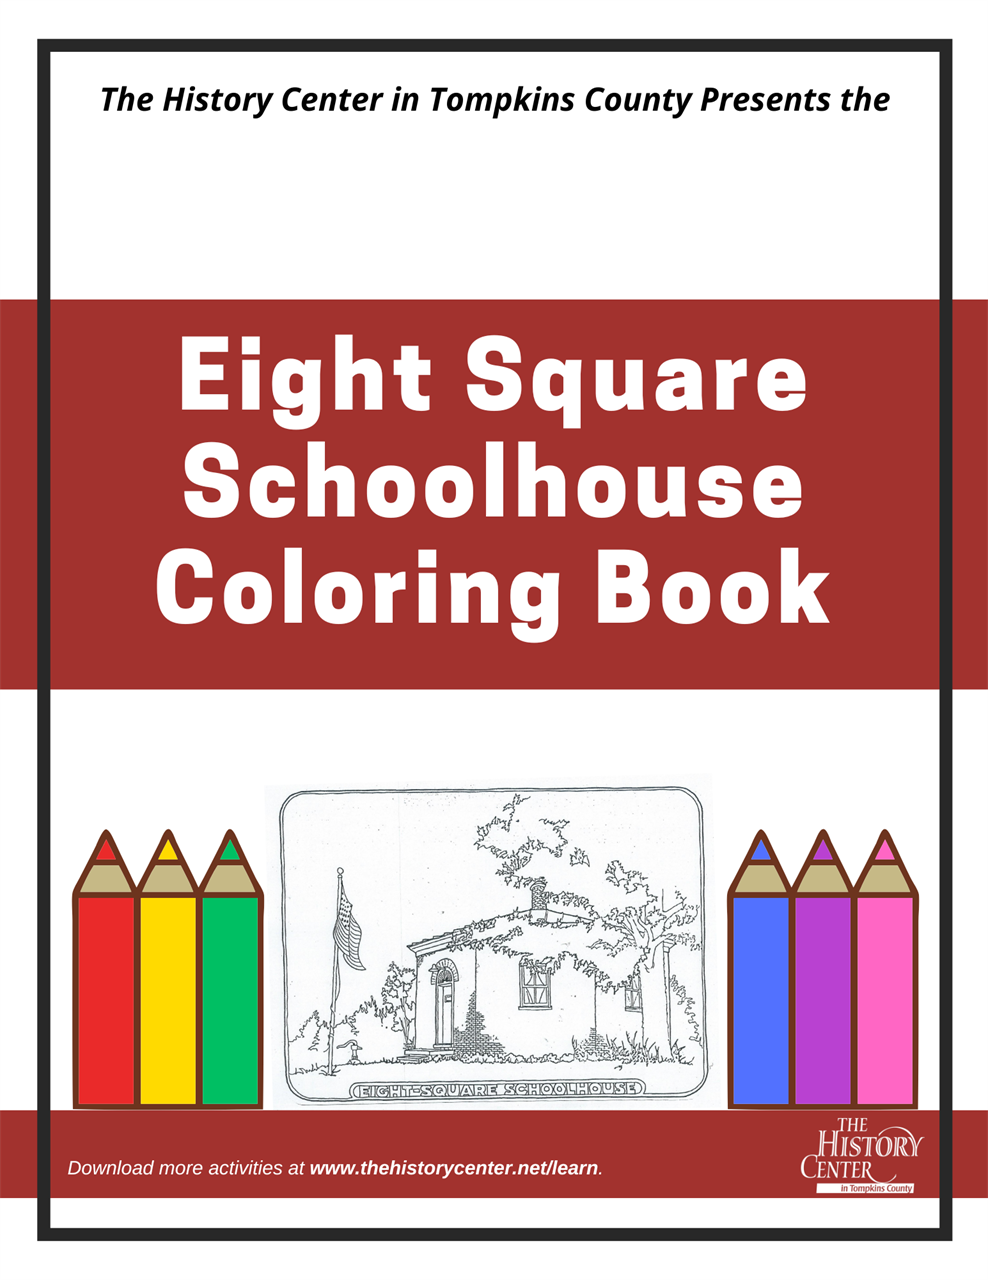 Eight Square schoolhouse coloring book activity with a sketch of the schoolhouse and multicolored pencils at the bottom